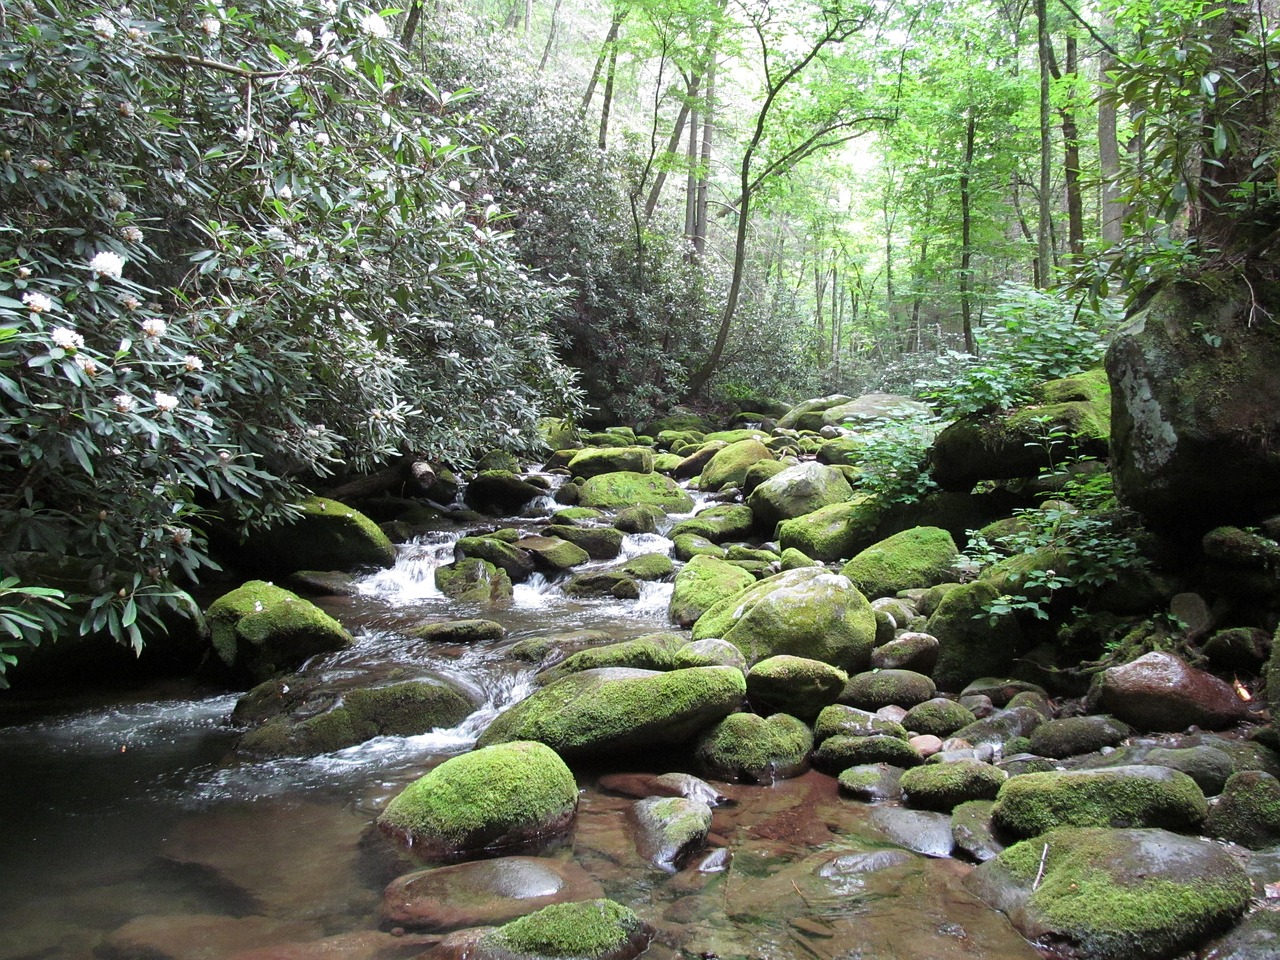 4-Day Adventure in the Smoky Mountains